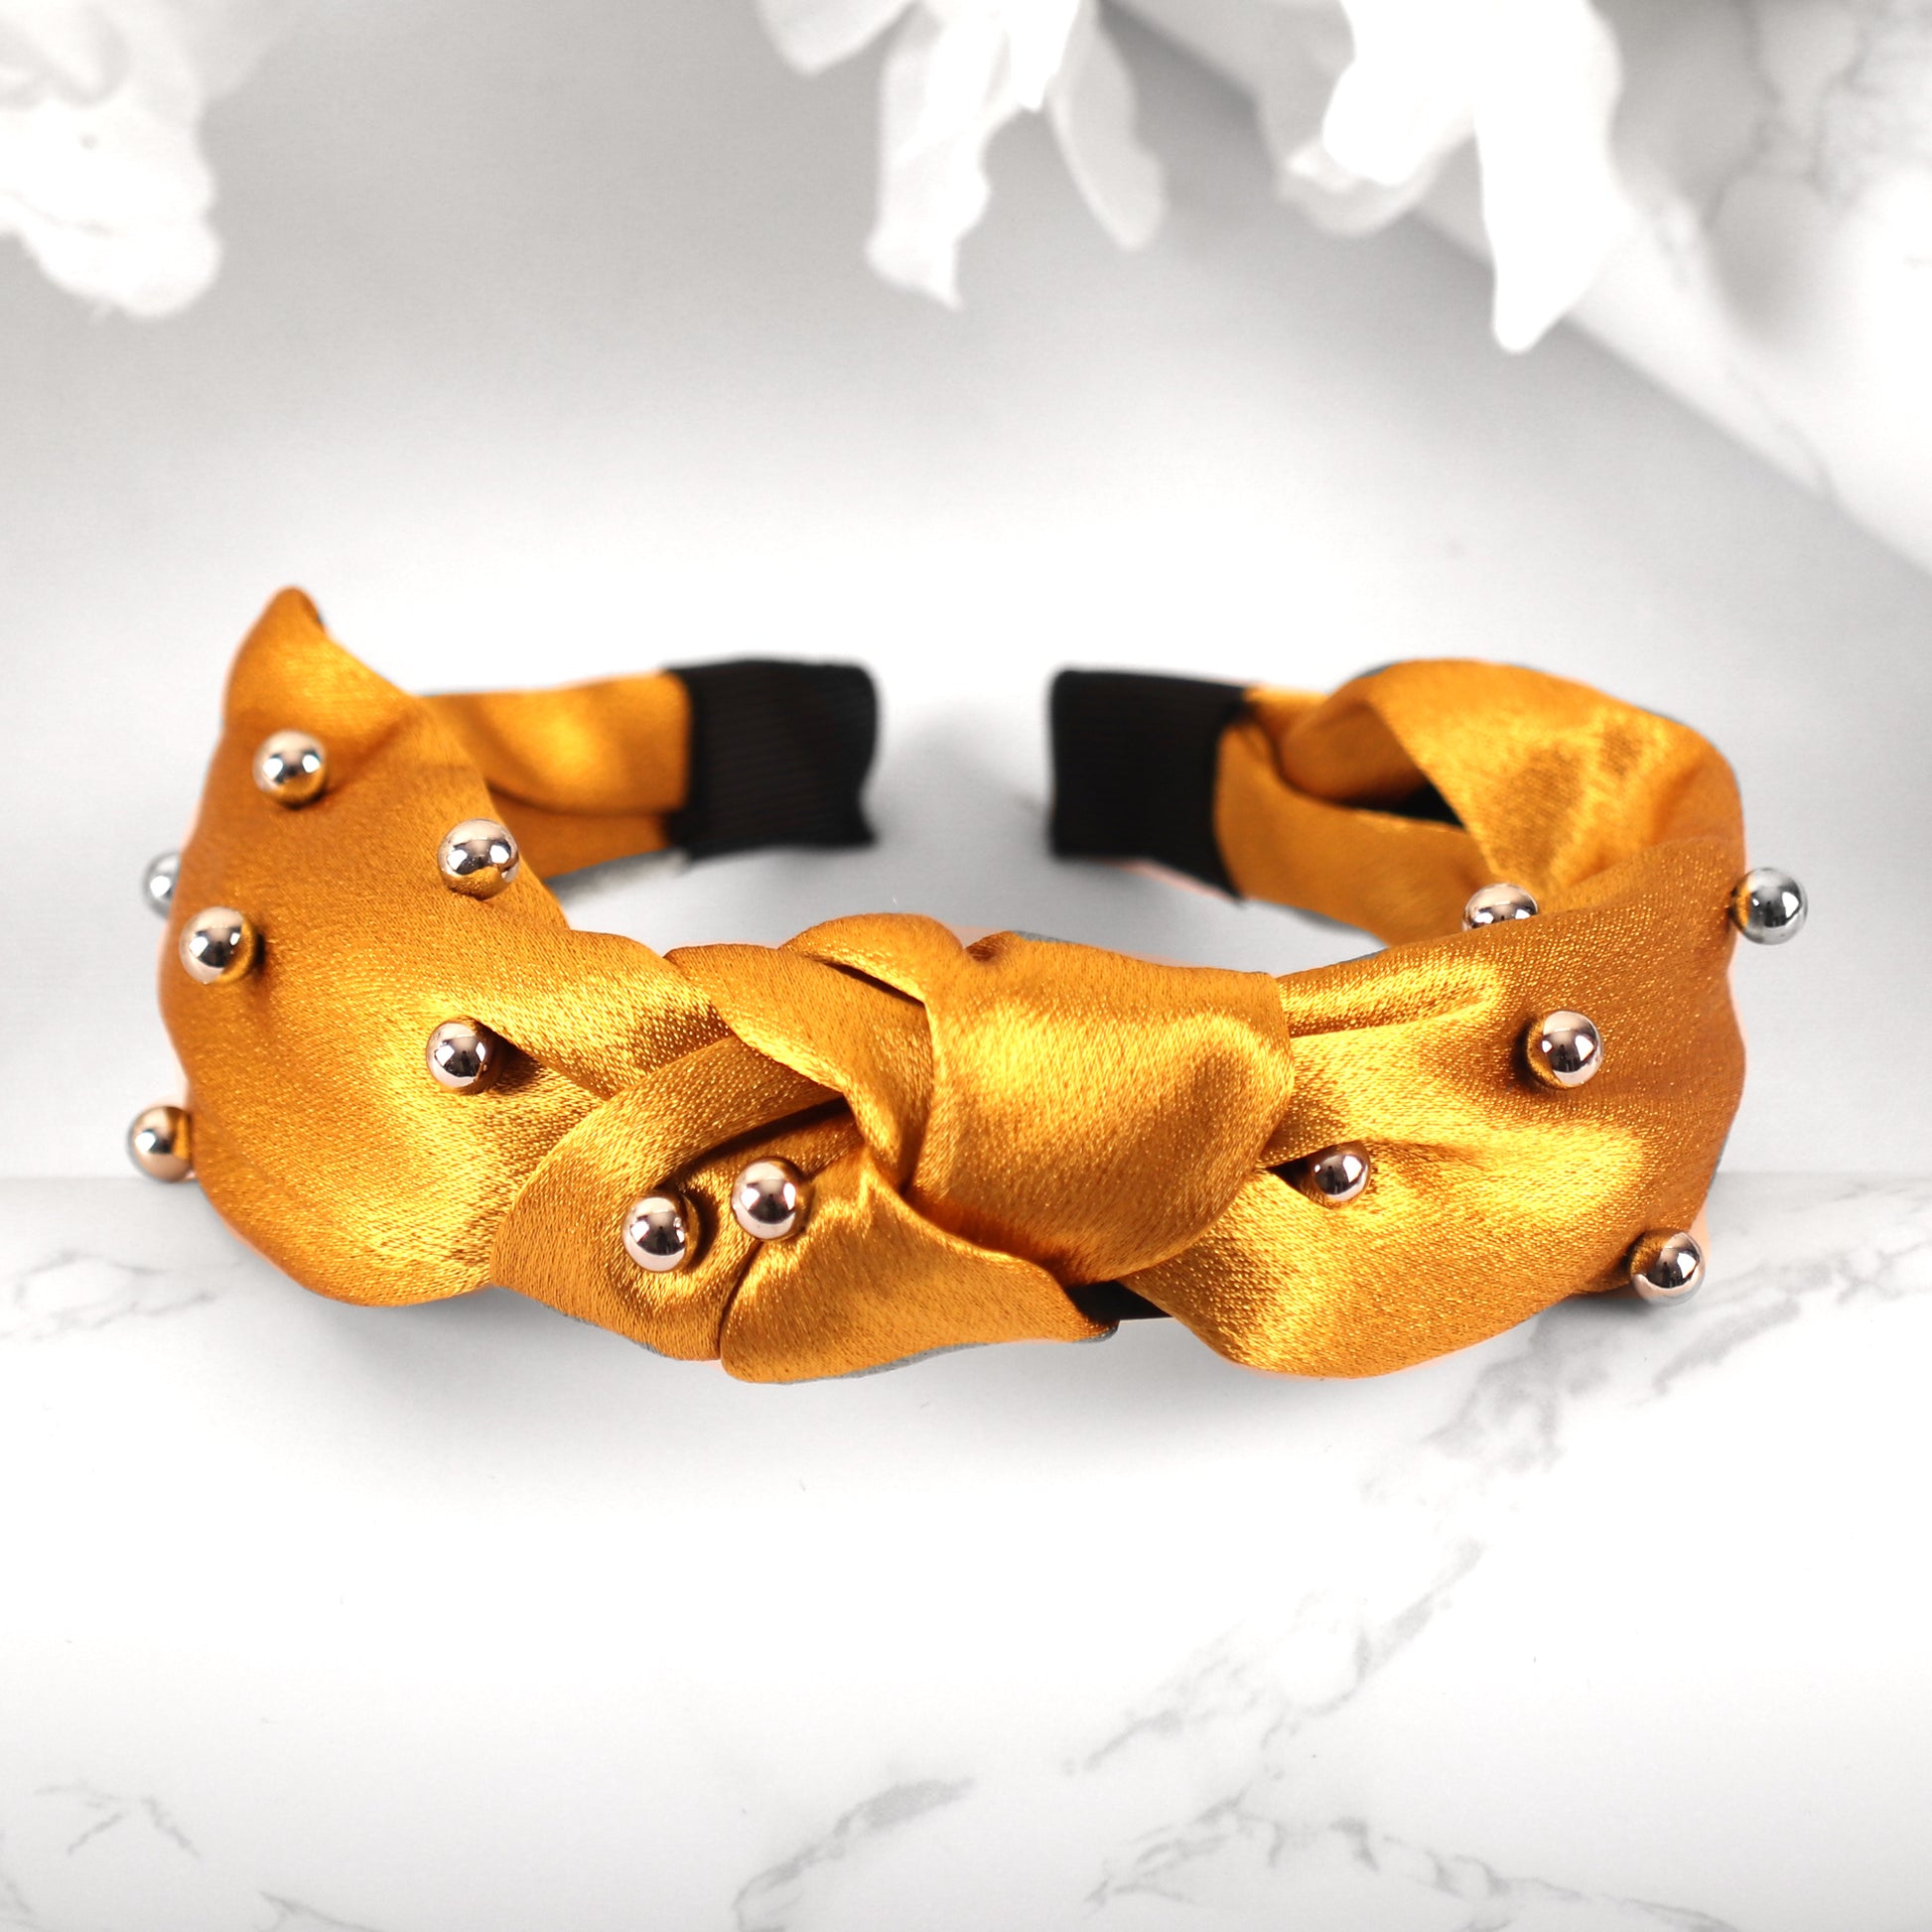 HairBand,The Hair Flair Satin Hair Band in Yellow - Cippele Multi Store